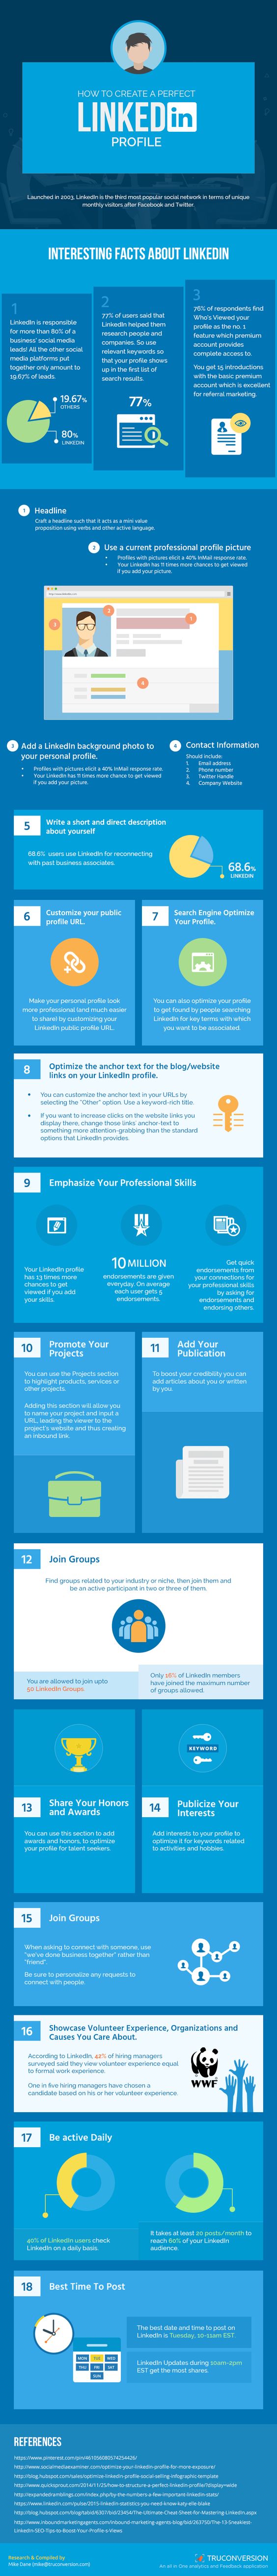 18 Tips to Create Your Perfect LinkedIn Profile (Infographic)